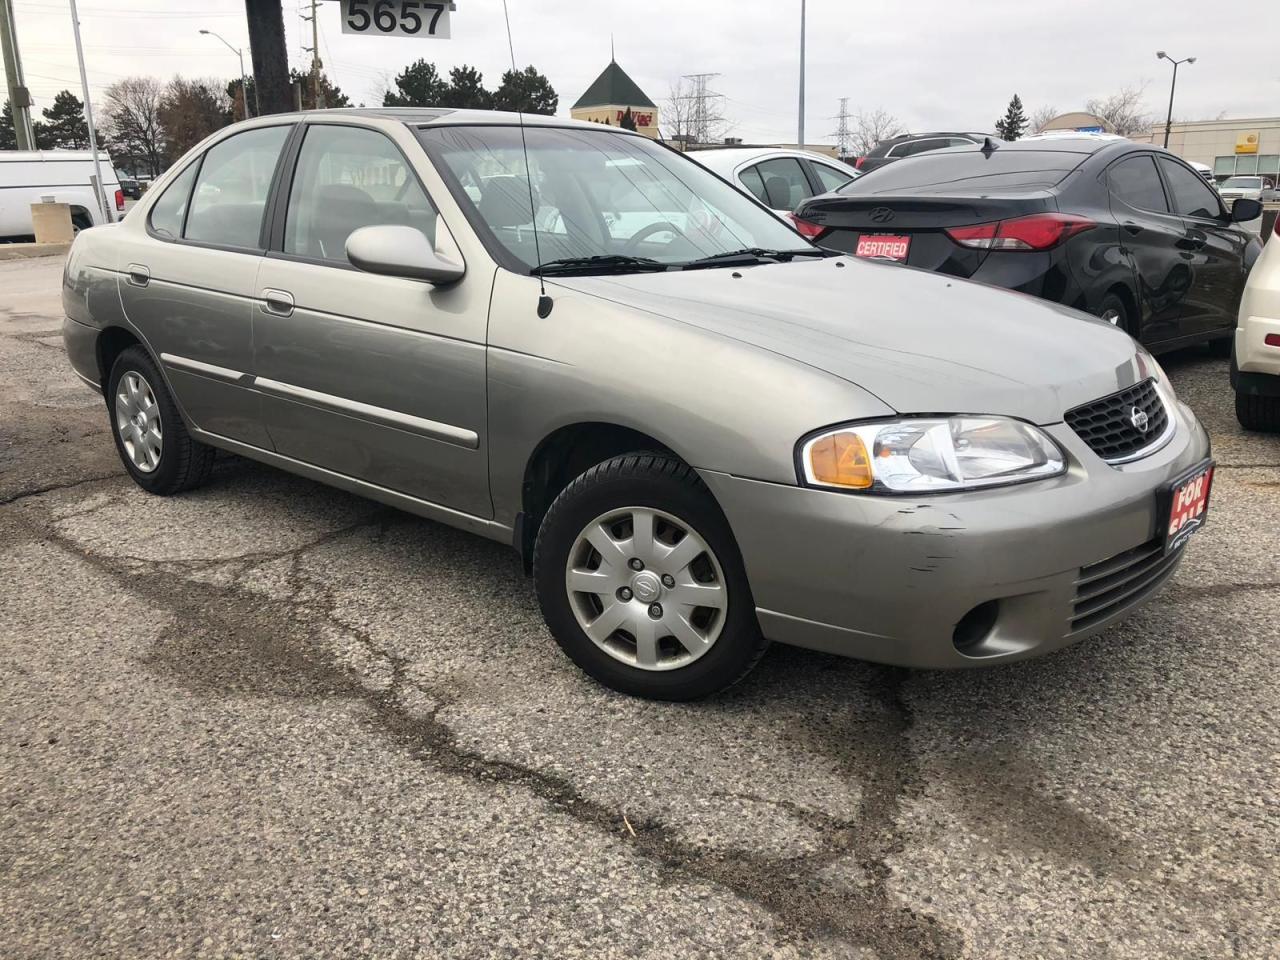 2002 Nissan Sentra GXE, Winter Tires,AccidentFree, Certified,Warranty - Photo #1